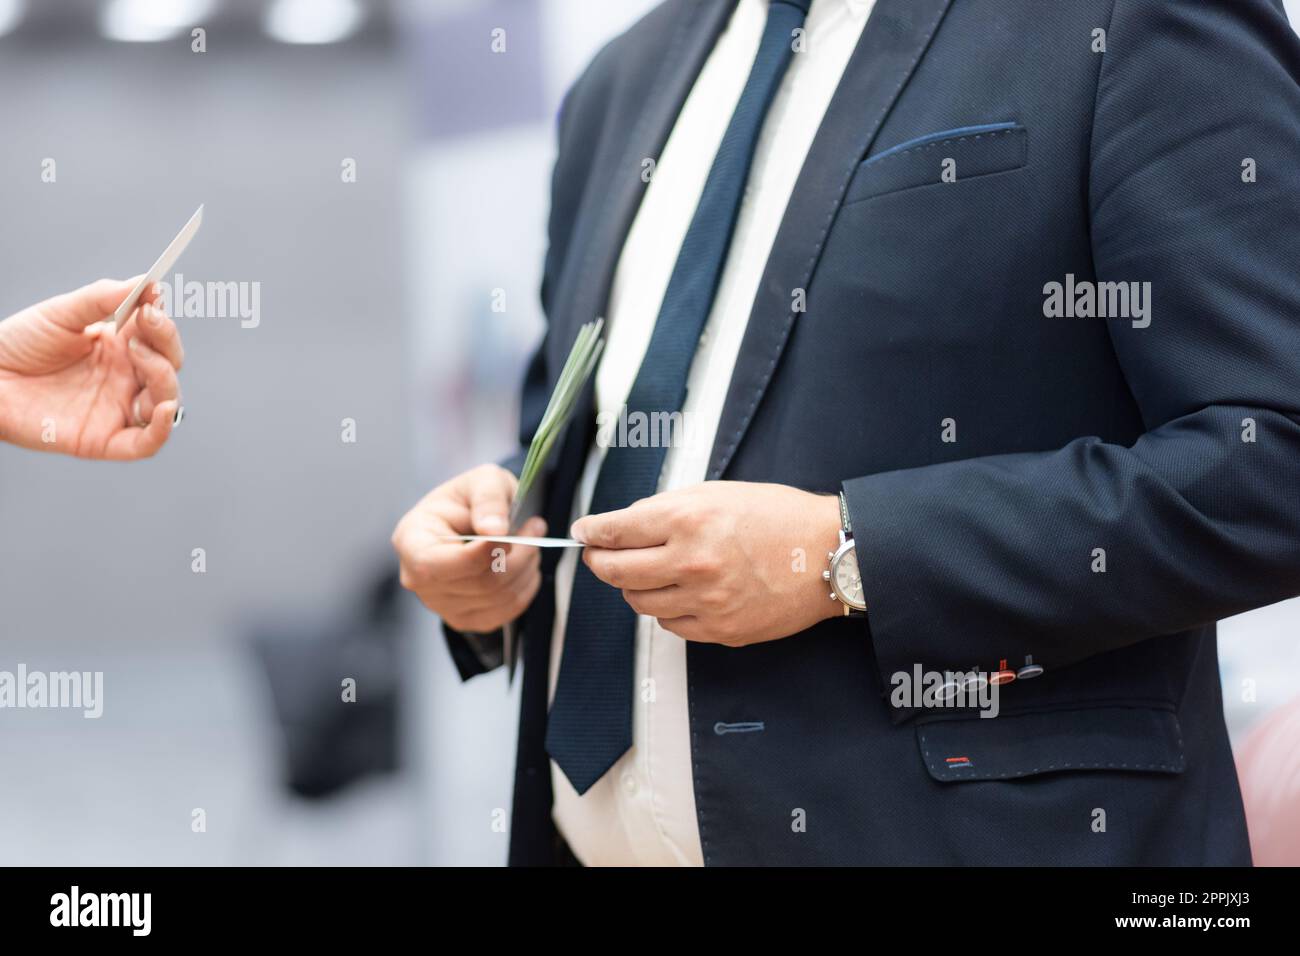 Business people exchanging business card on business meeting, Business discussion talking deal concept Stock Photo